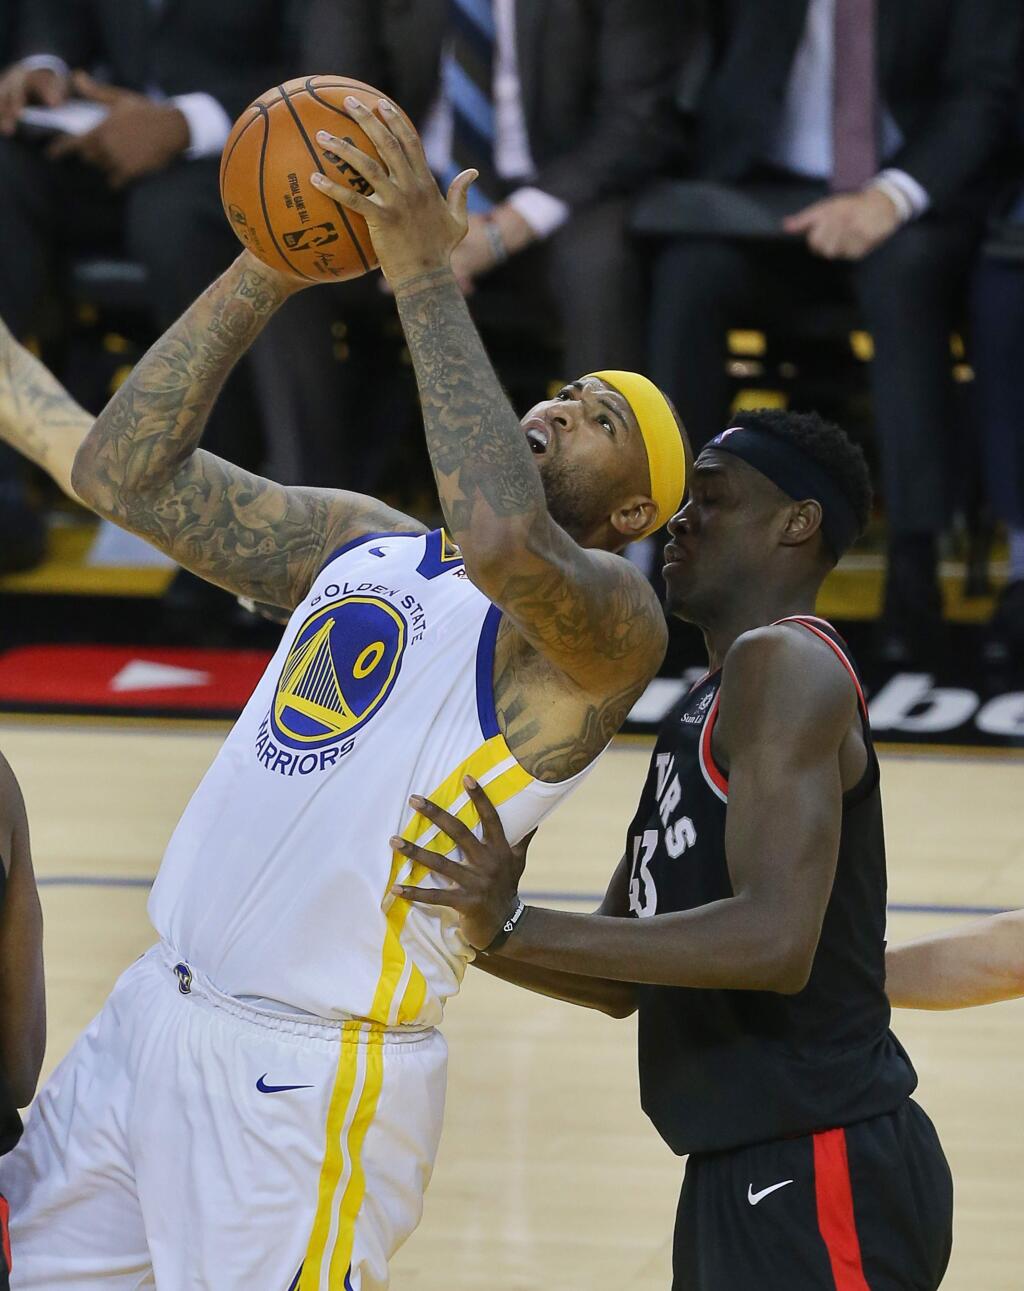 Golden State Warriors center DeMarcus Cousins is fouled by Toronto Raptors forward Pascal Siakam while making a basket during game 3 of the NBA Finals in Oakland on Wednesday, June 5, 2019. (Christopher Chung/ The Press Democrat)